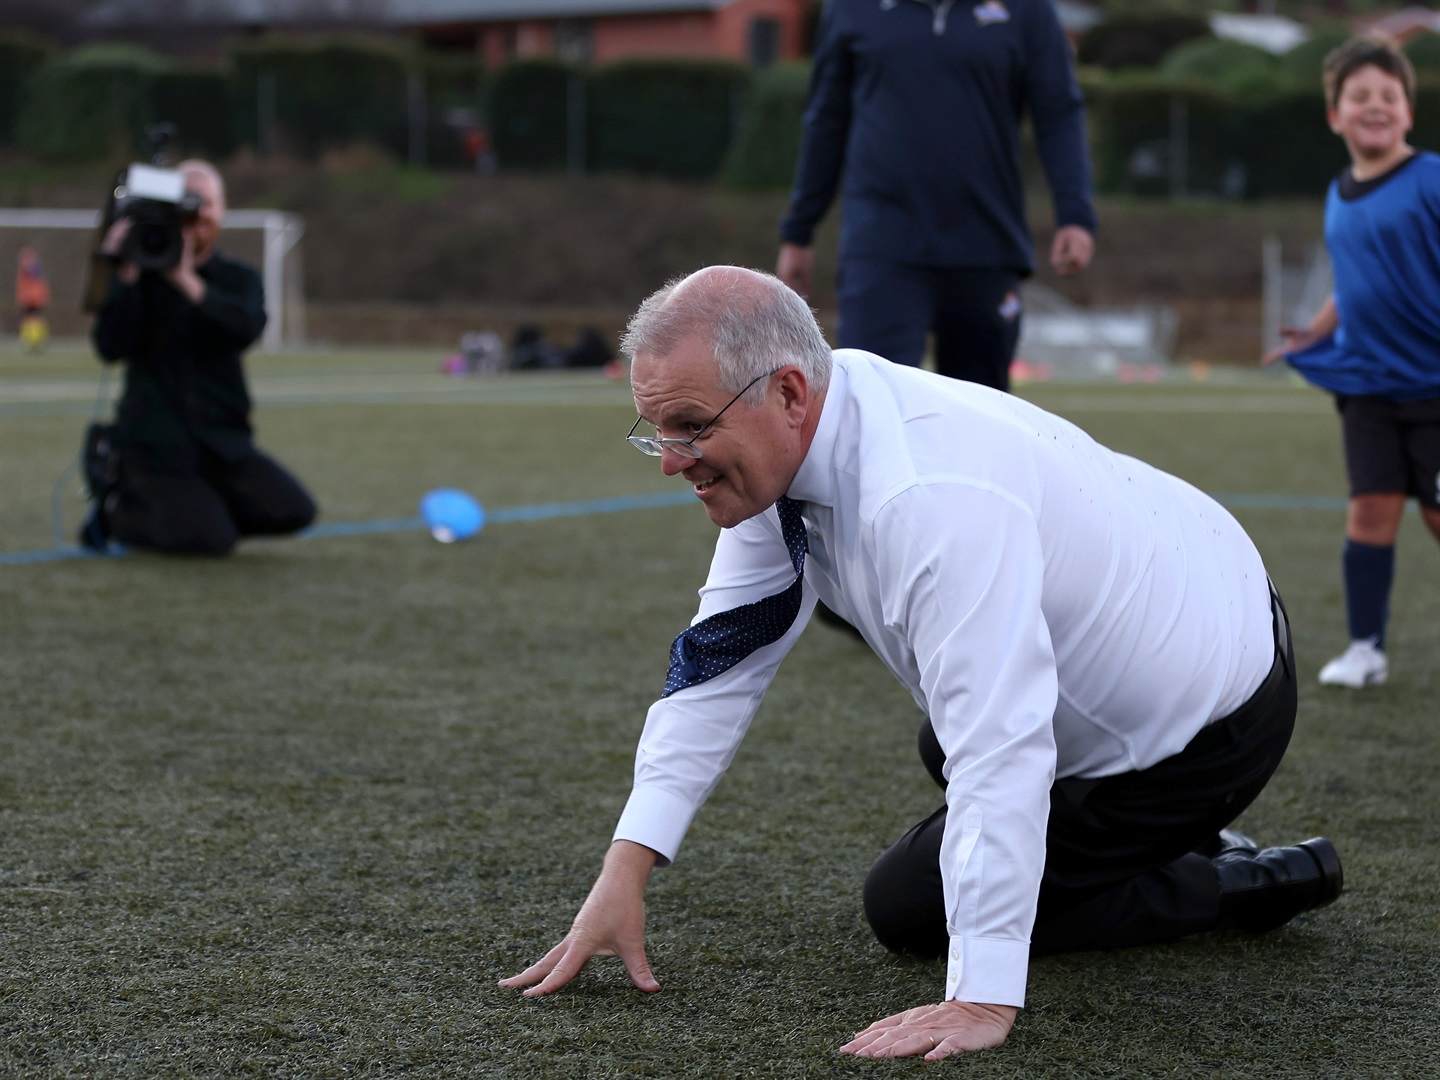 Prime Minister Scott Morrison falls over after accidentally knocking over a child during a visit to the Devonport Strikers Soccer Club, which is in the electorate of Braddon, on May 18, 2022 in Devonport, Australia. Photo by Asanka Ratnayake/Getty Images